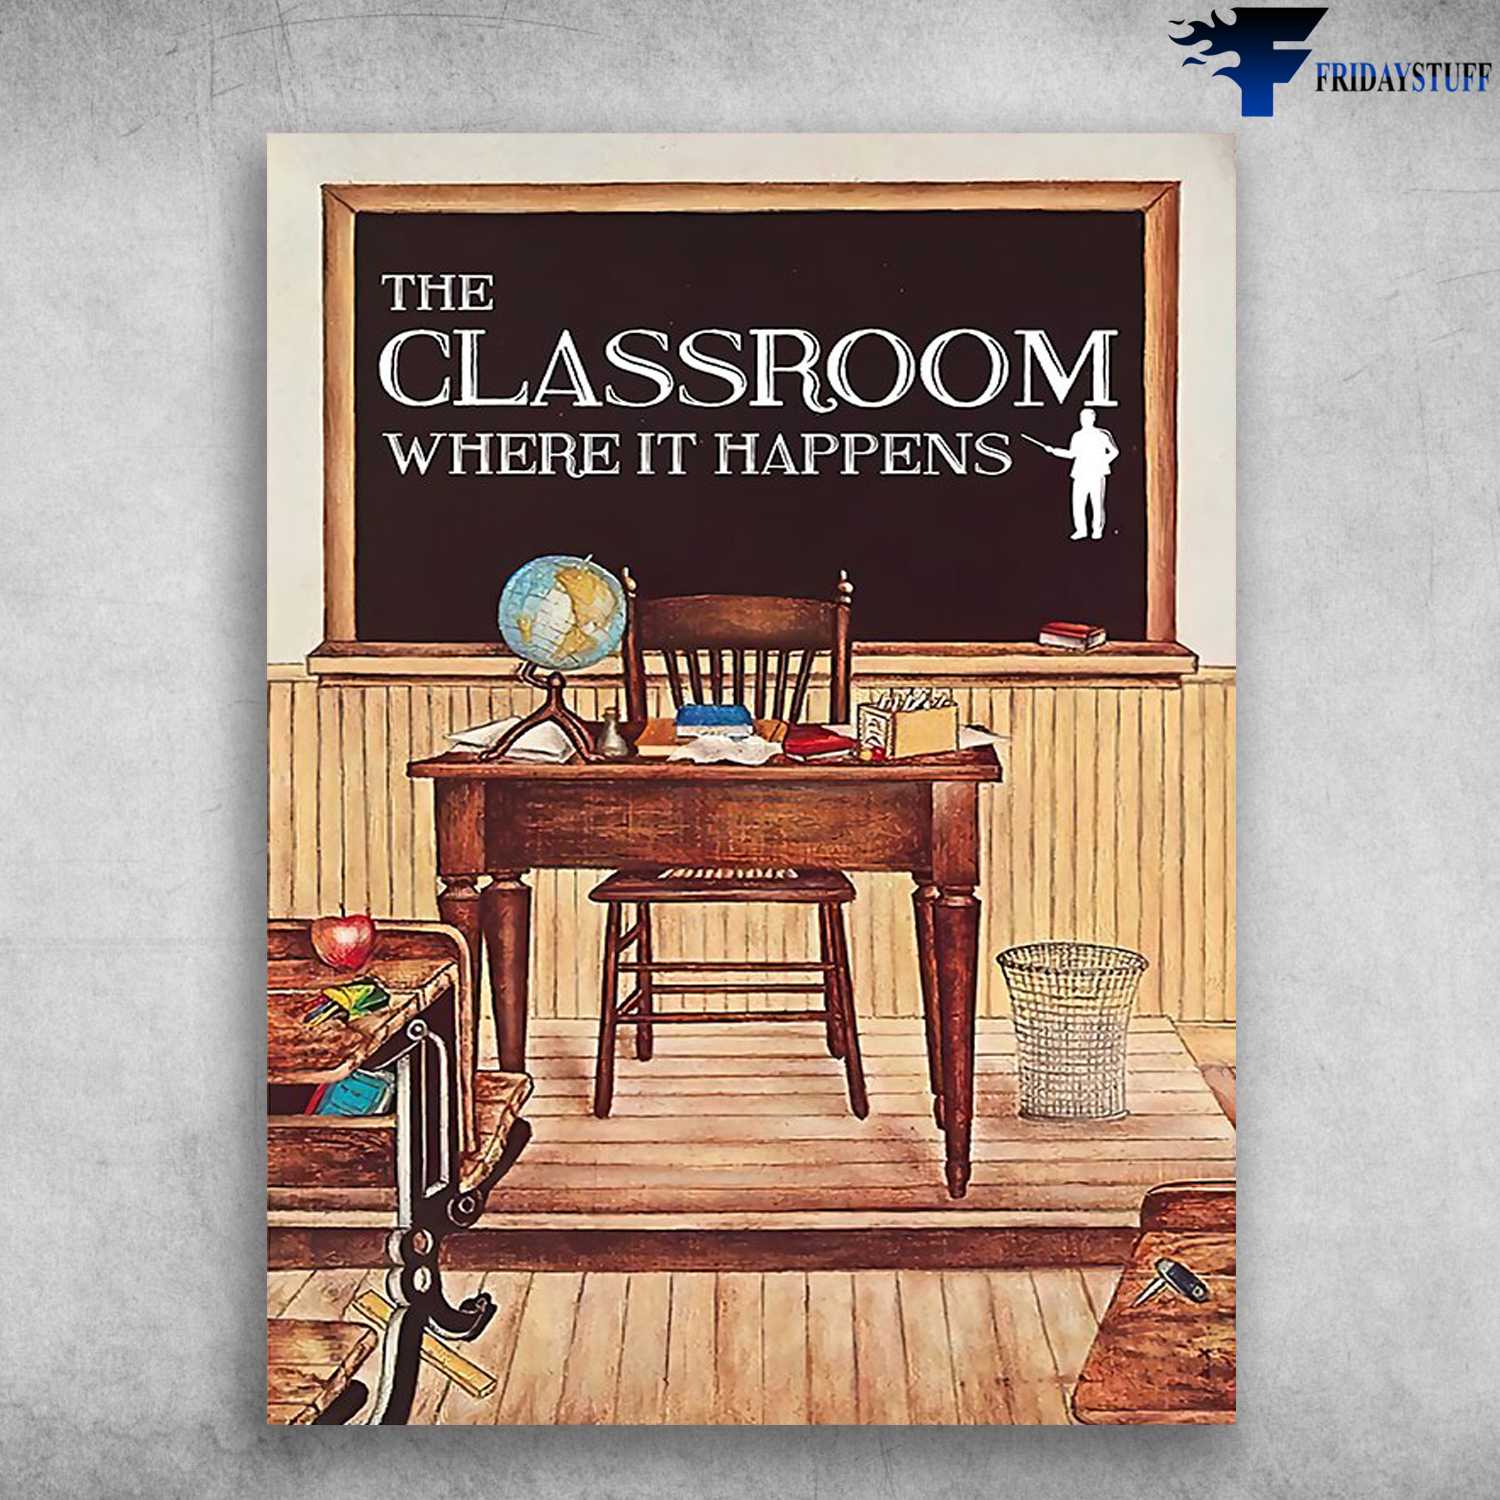 Classroom Poster - The Classroom, Where It Happens